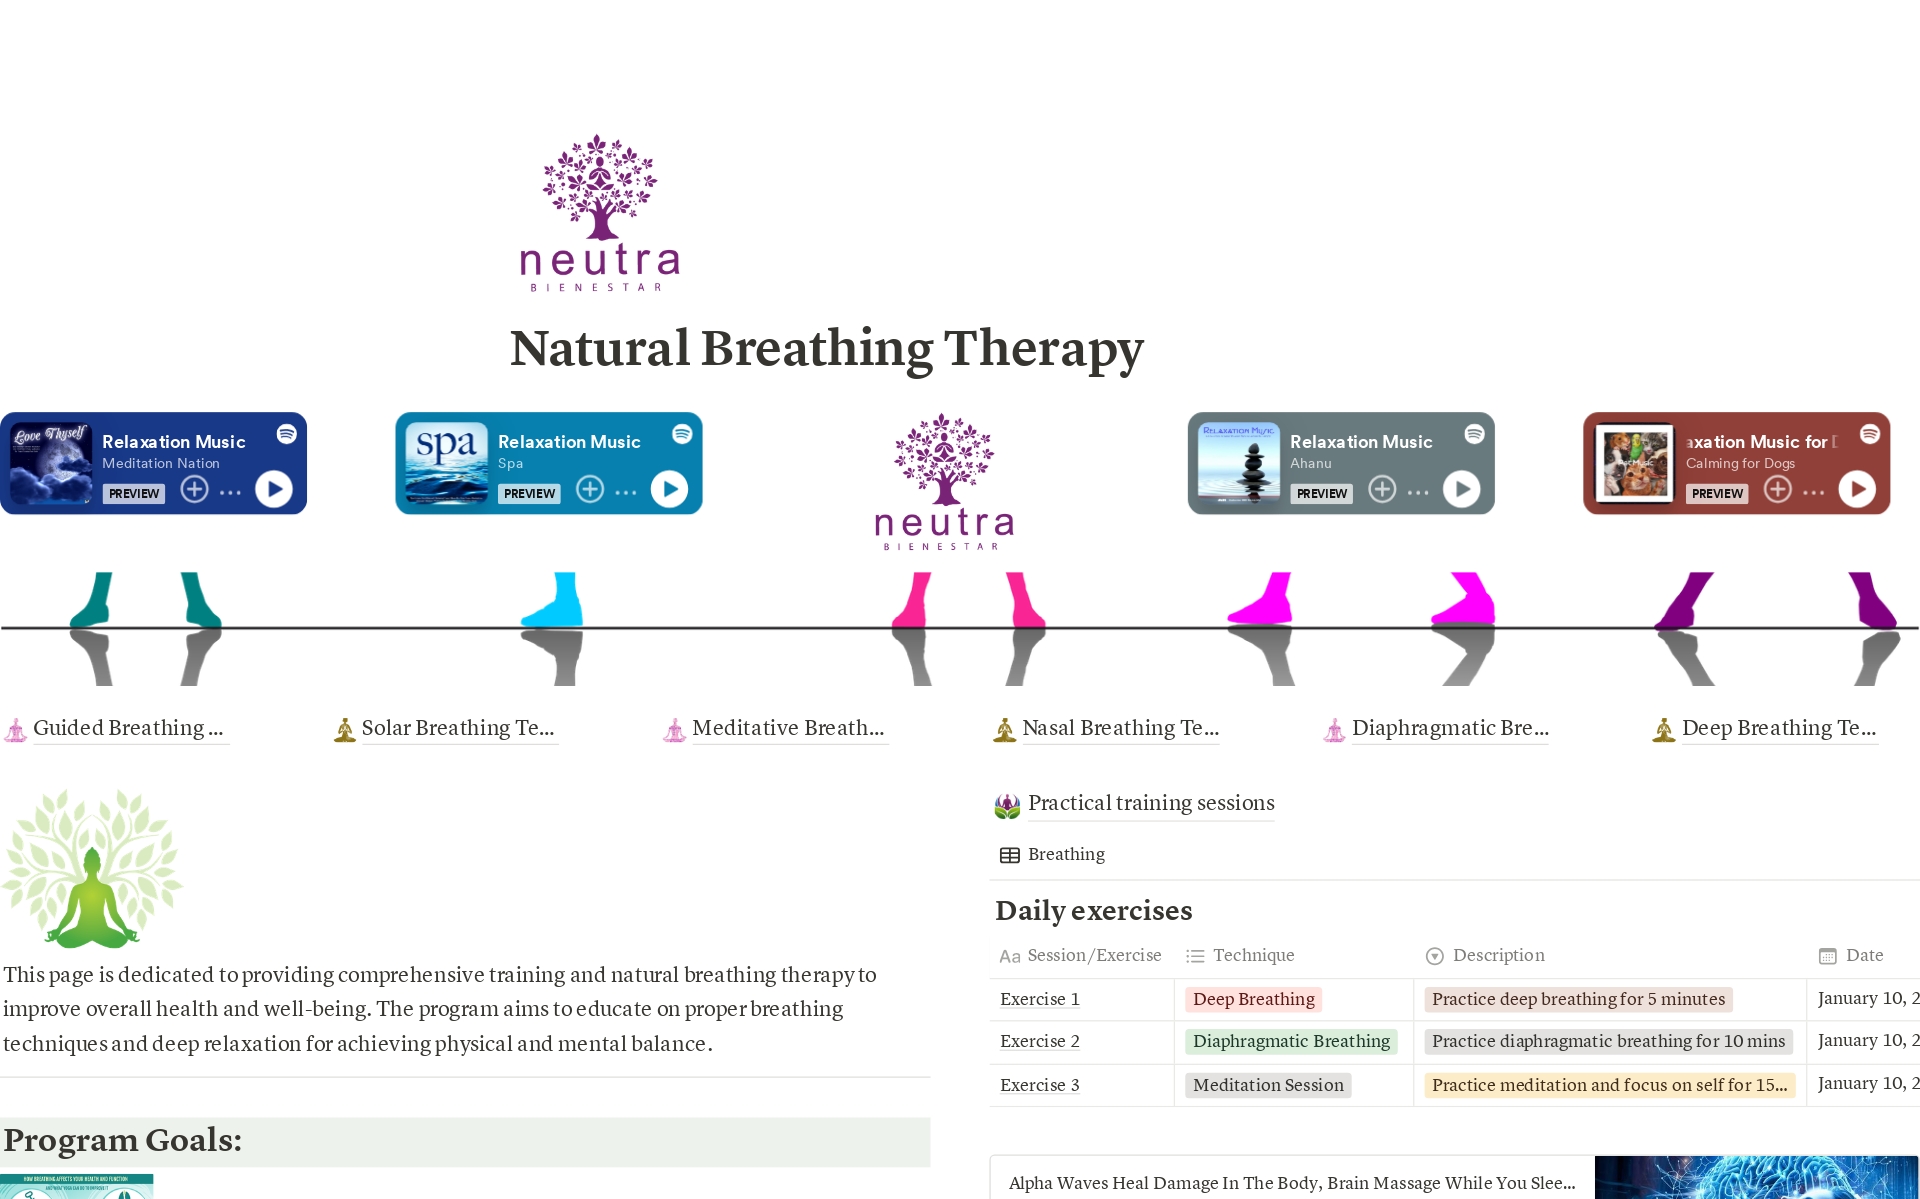 This template aims to provide users with an individual experience for daily practice of breathing and meditation techniques, along with the inclusion of relaxation music. 